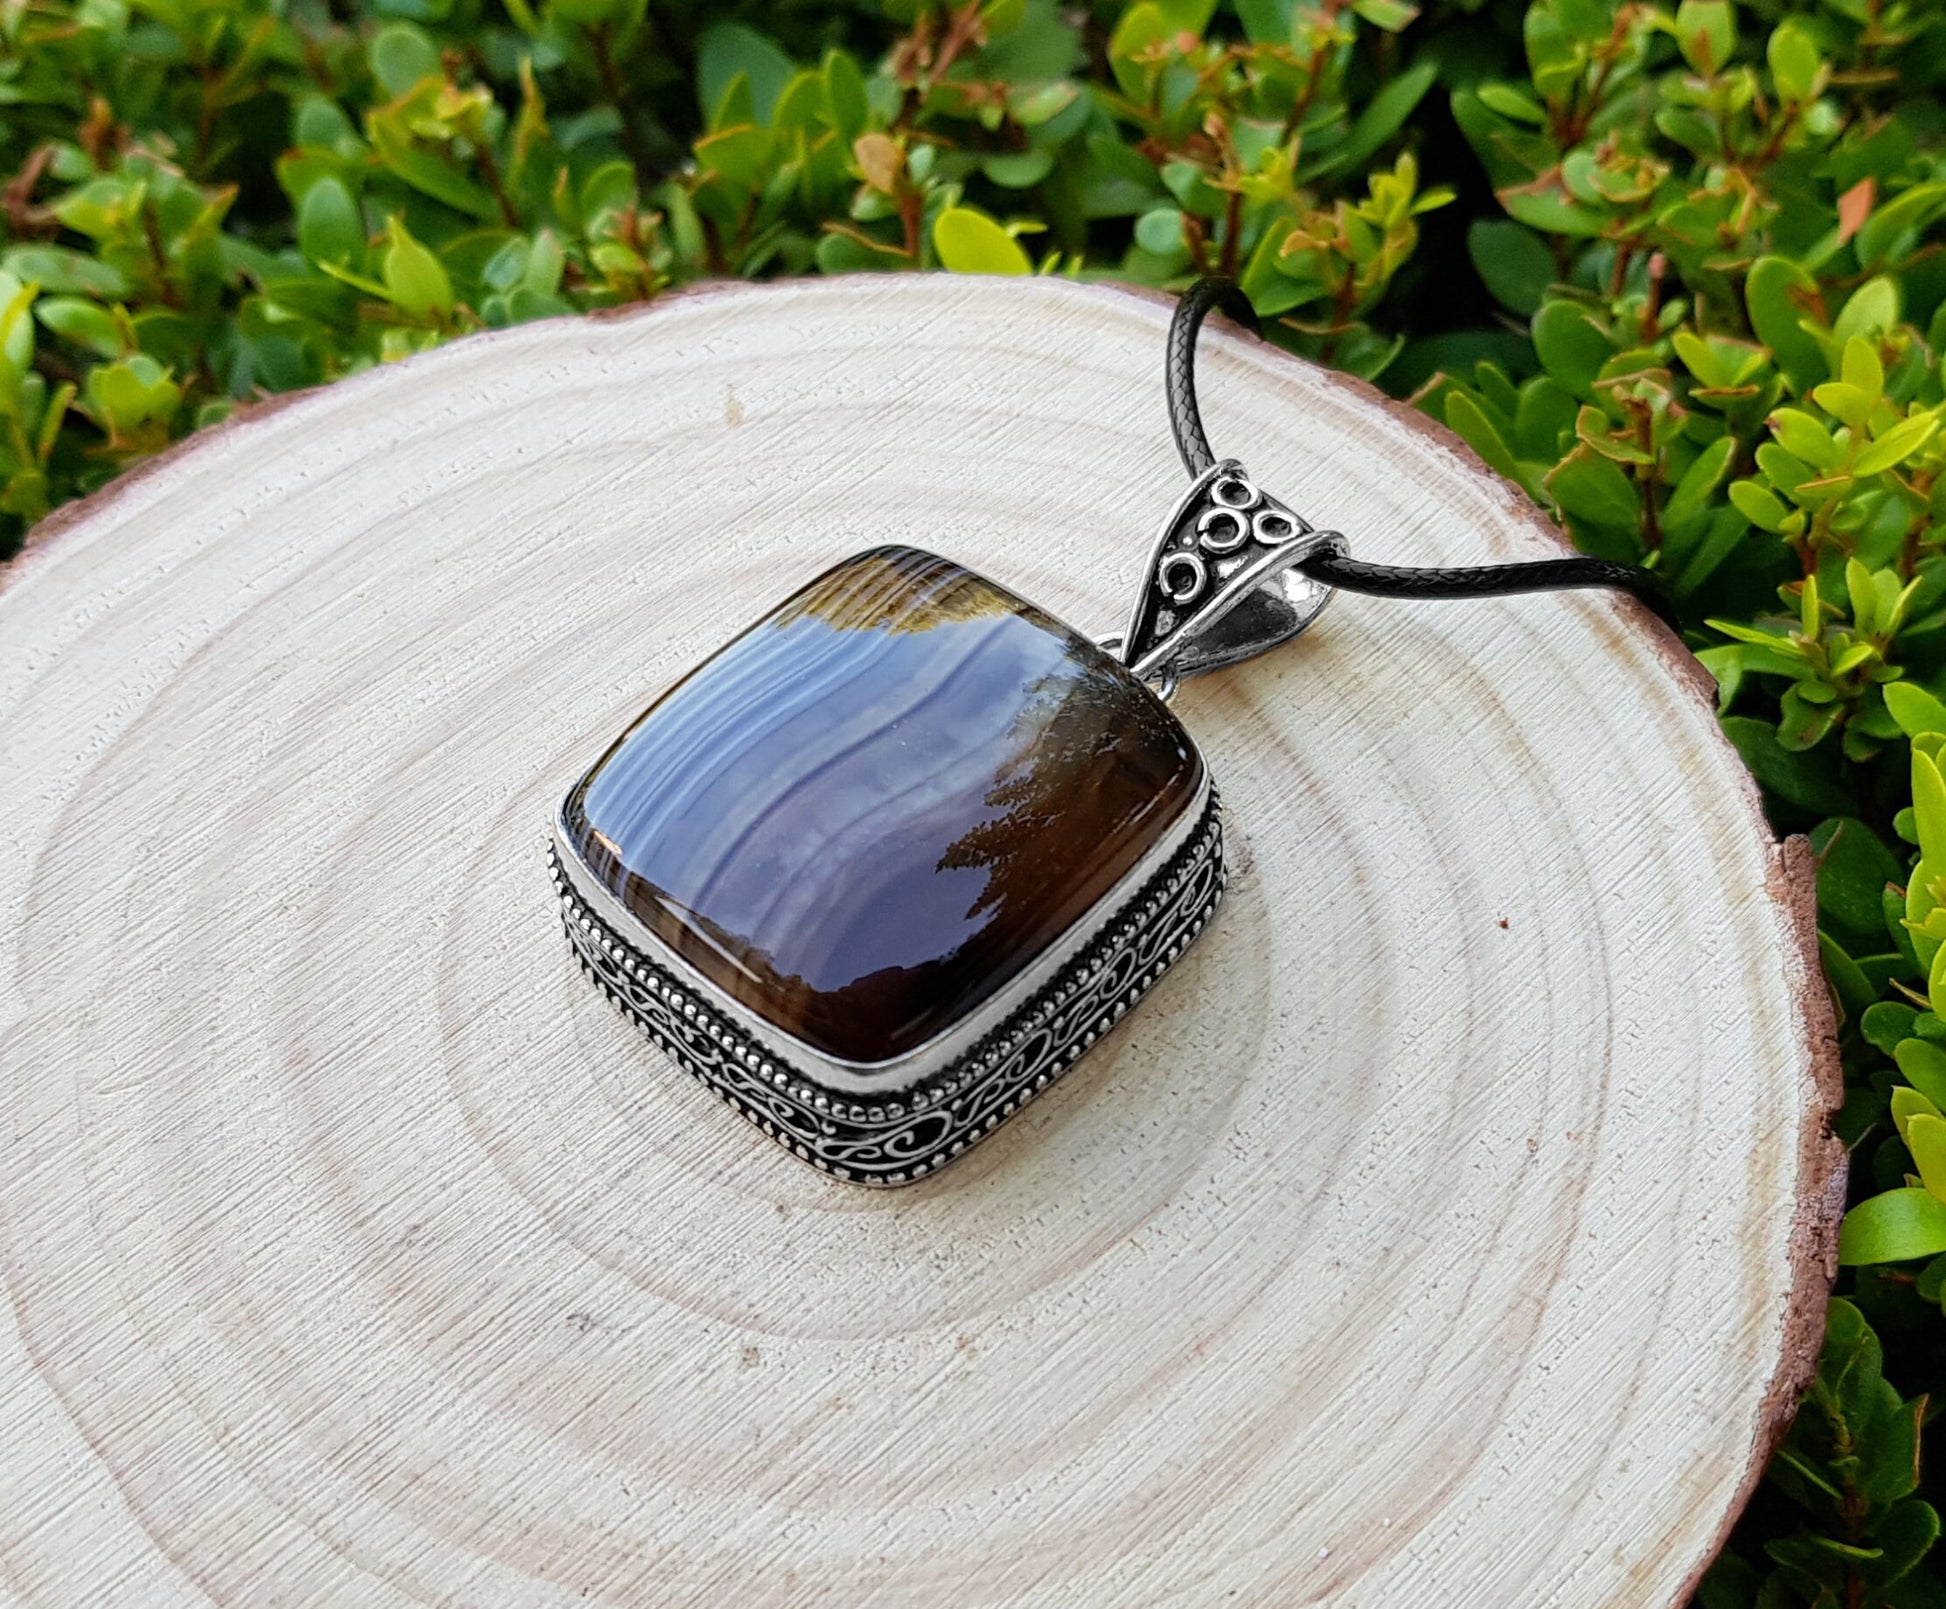 Botswana Agate Pendant In Sterling Silver Boho Crystal Necklace Unique Gift Unisex Necklace